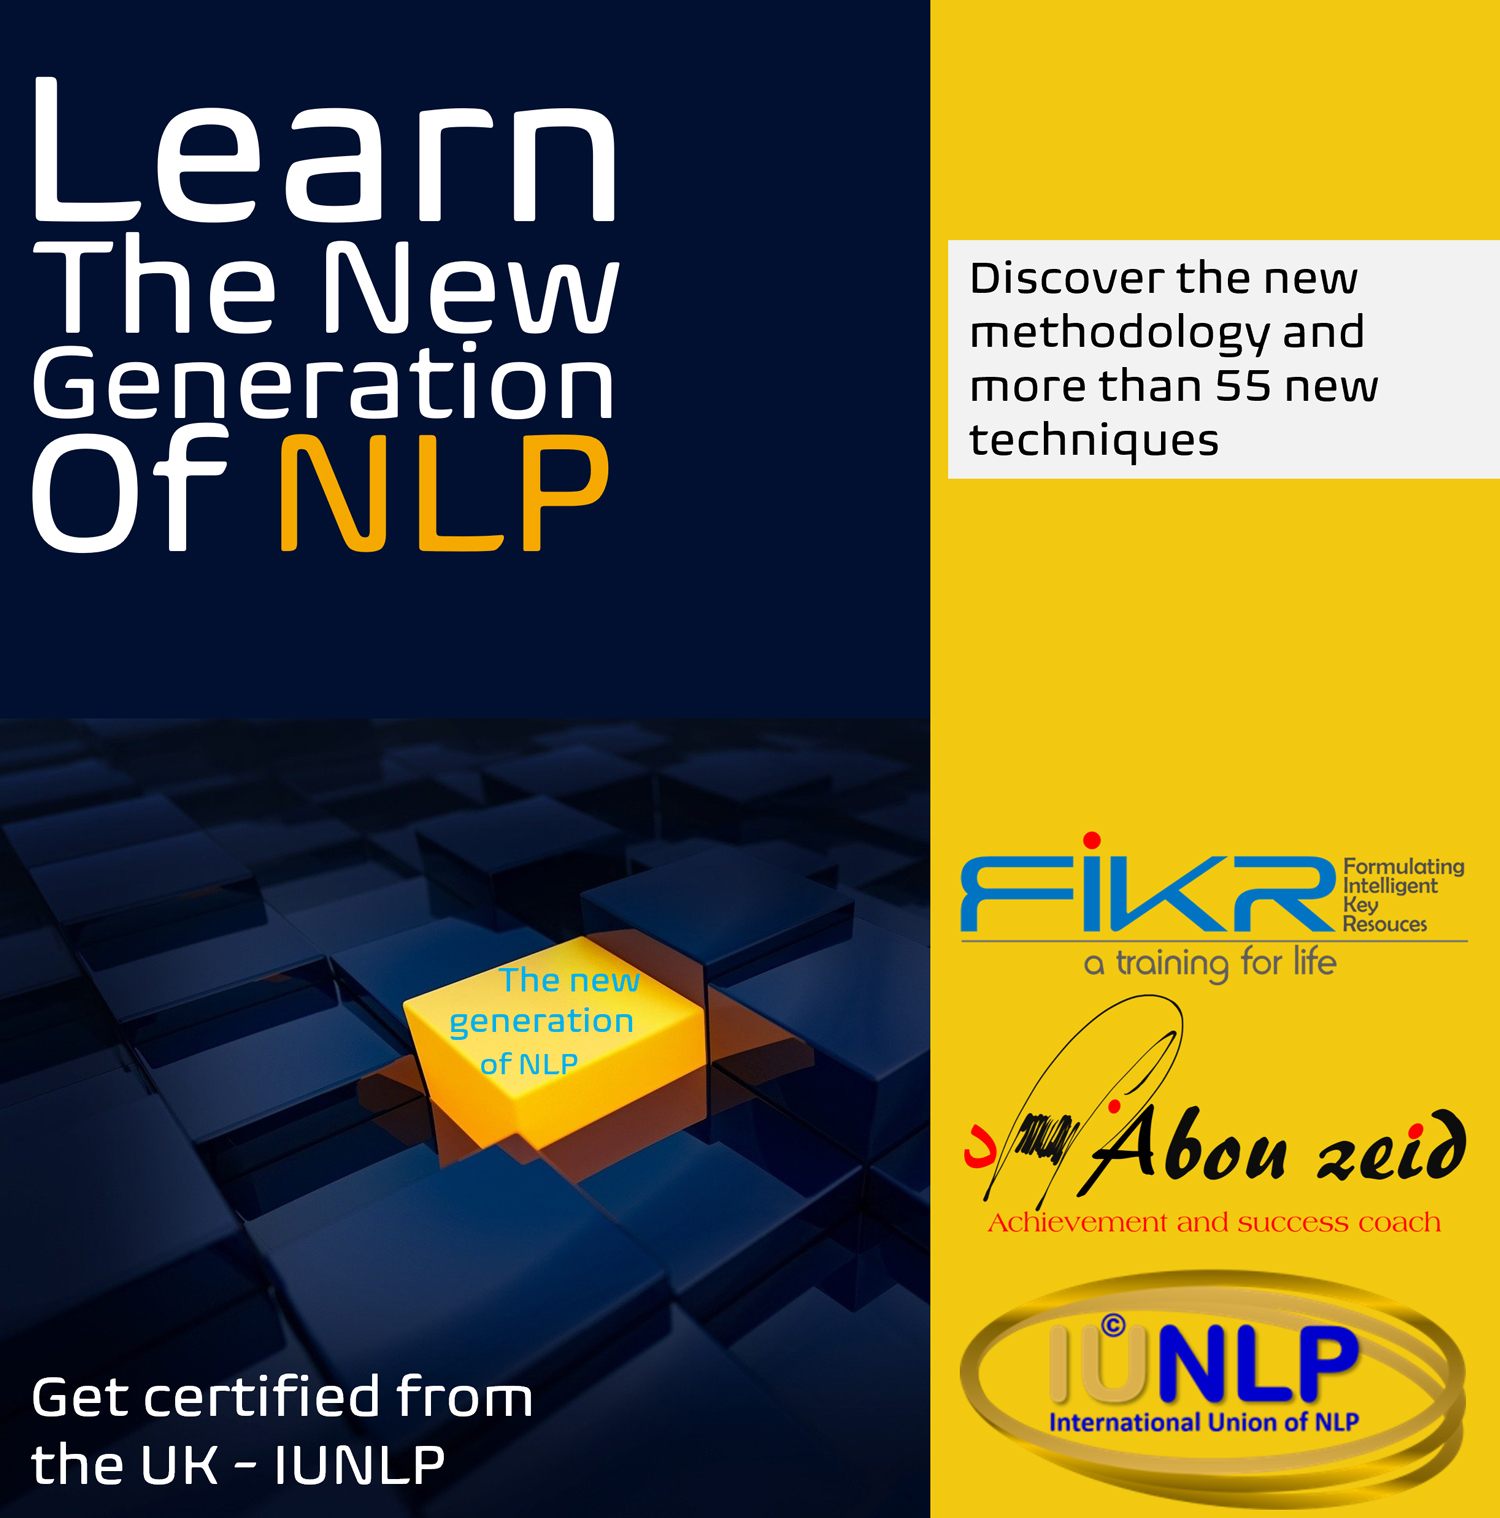 the-new-generation-of-NLP